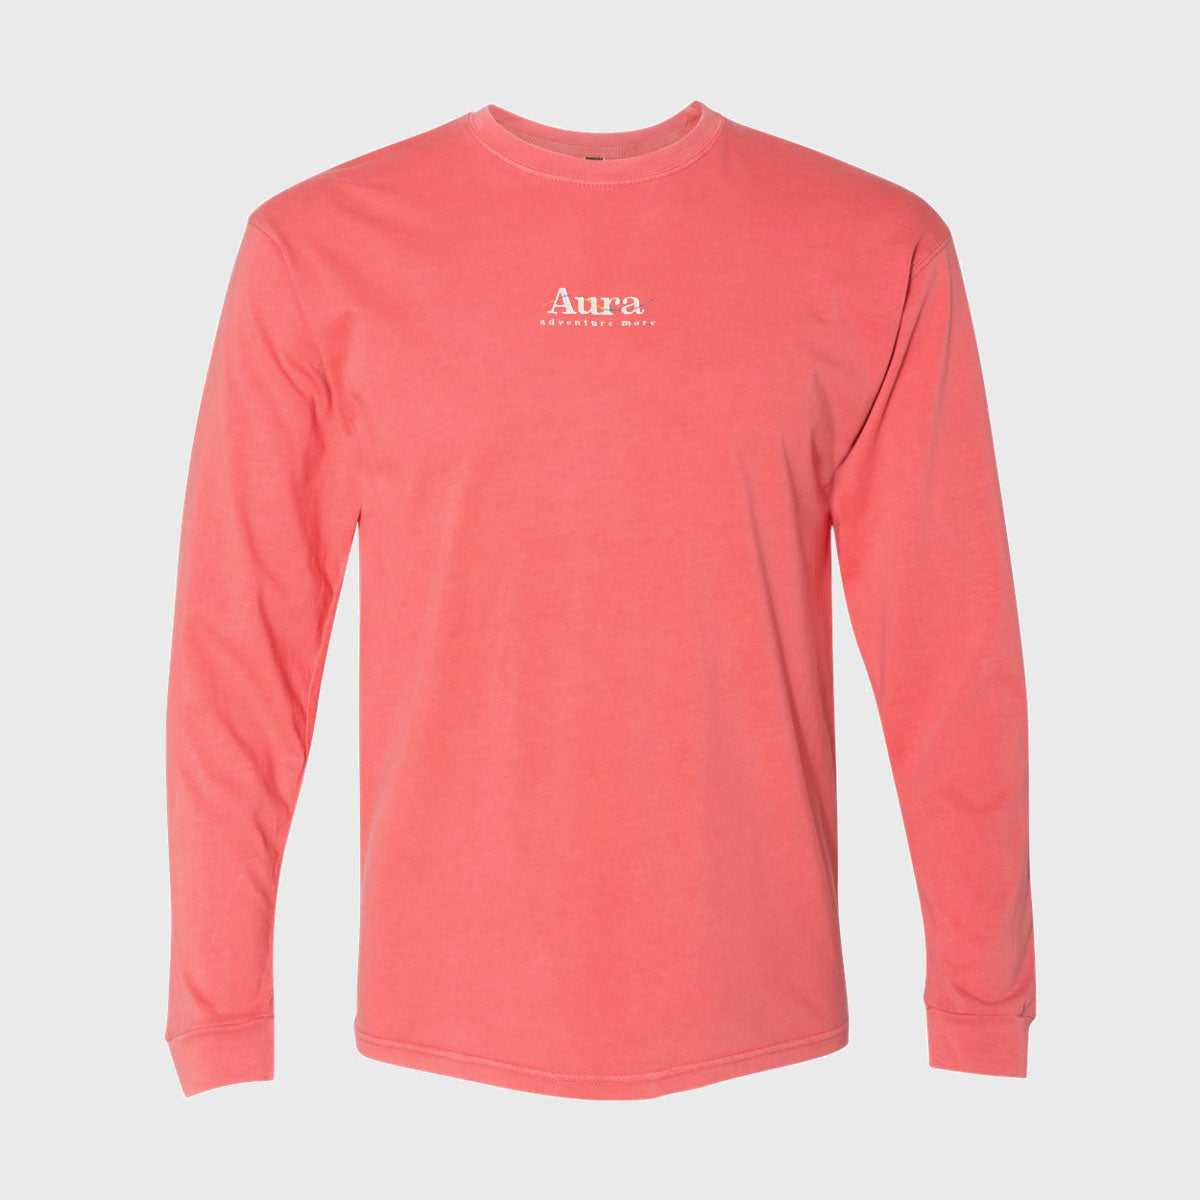 Vote for Adventure Embroidered Long Sleeve Tee - Salmon